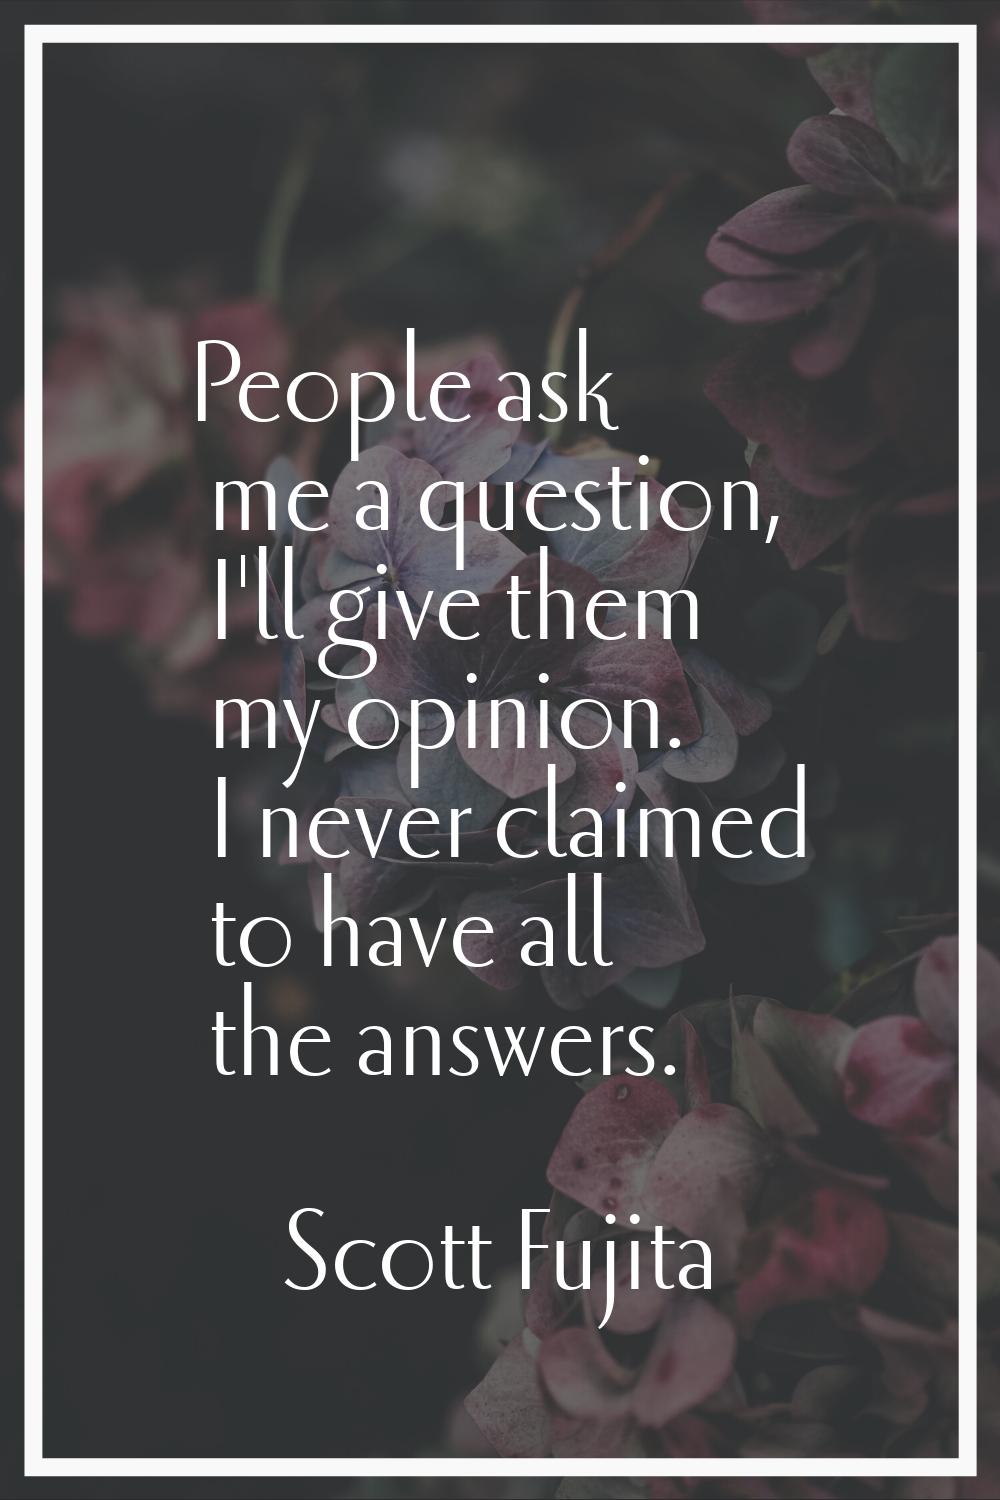 People ask me a question, I'll give them my opinion. I never claimed to have all the answers.